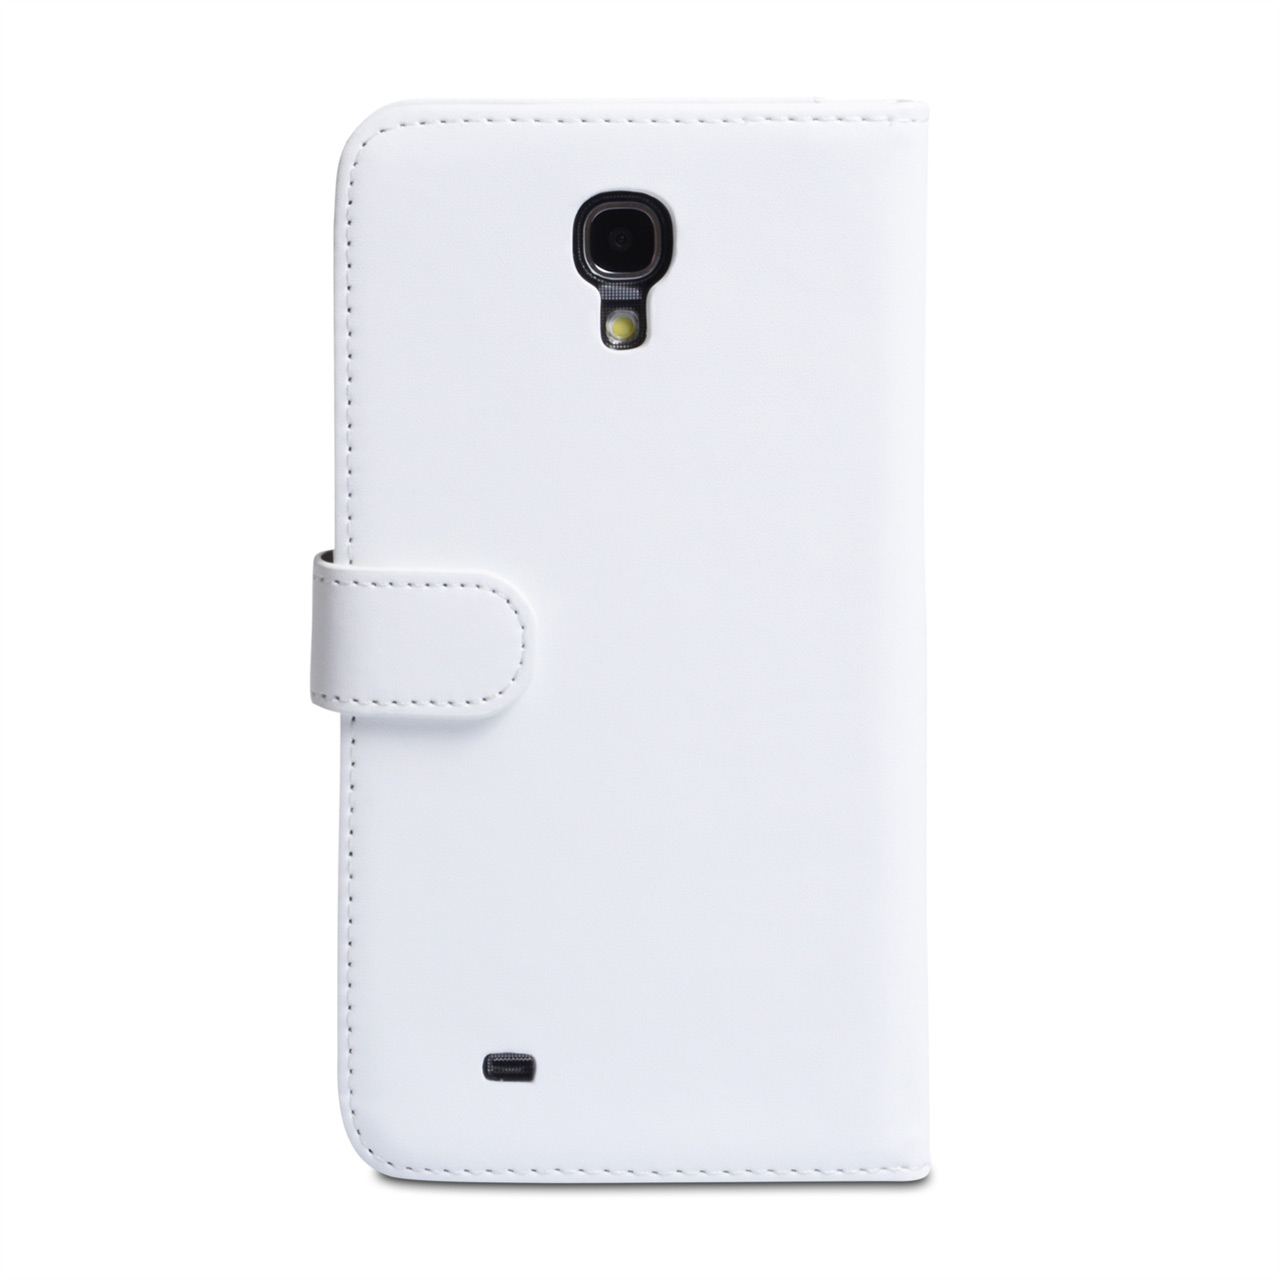 YouSave Samsung Galaxy Mega 6.3 White Leather Effect Wallet Case